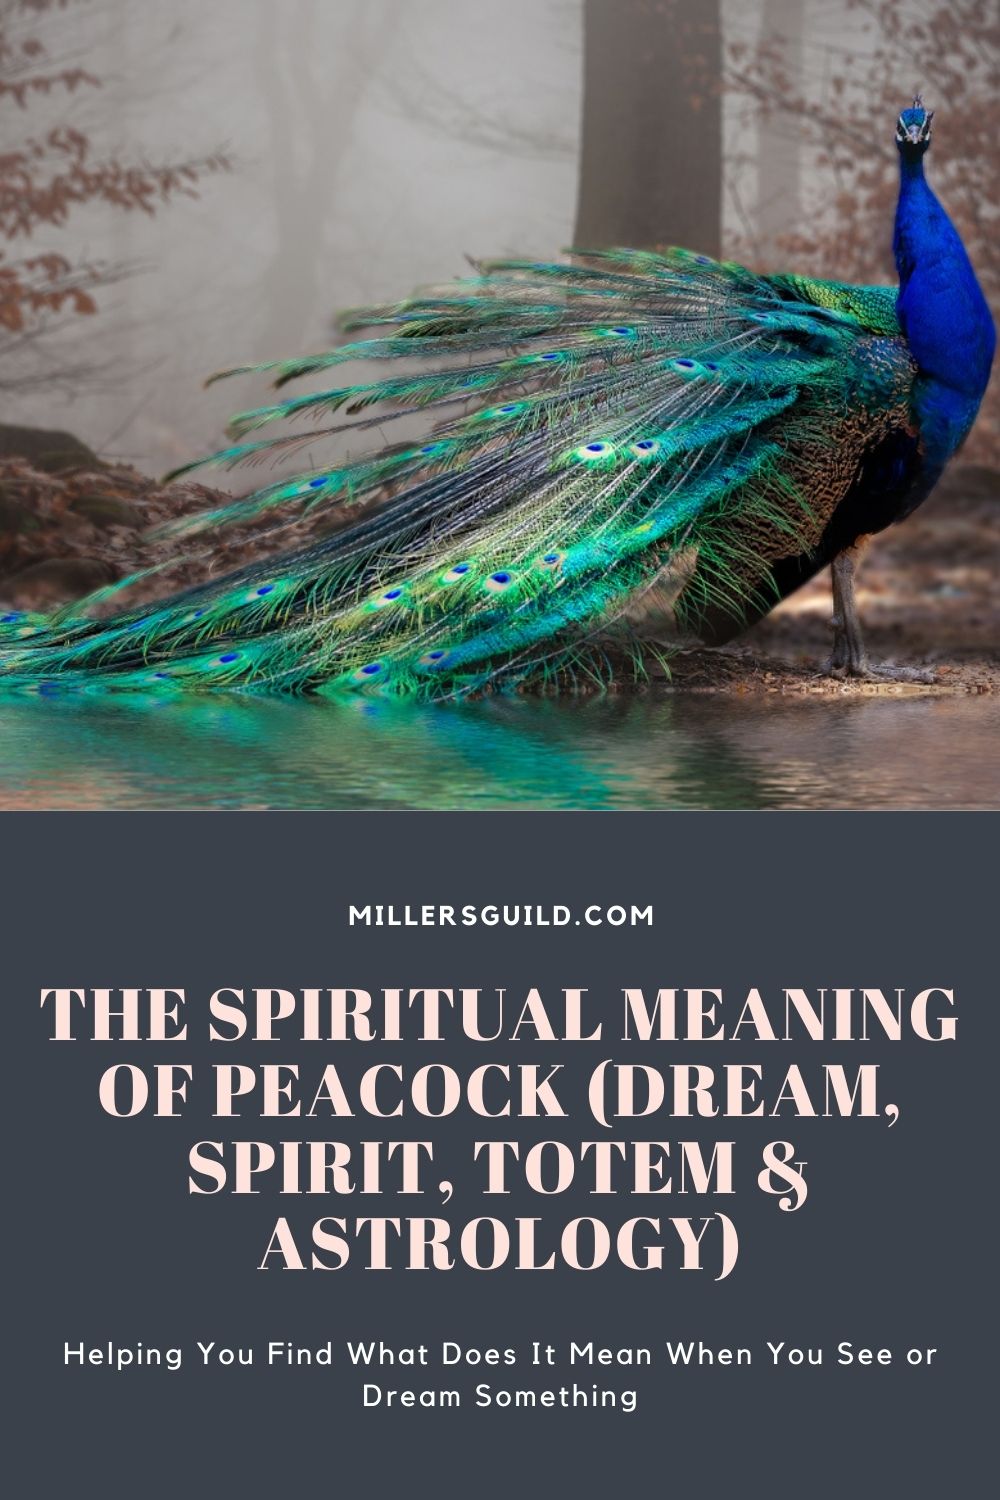 The Spiritual Meaning of Peacock (Dream, Spirit, Totem & Astrology) 2